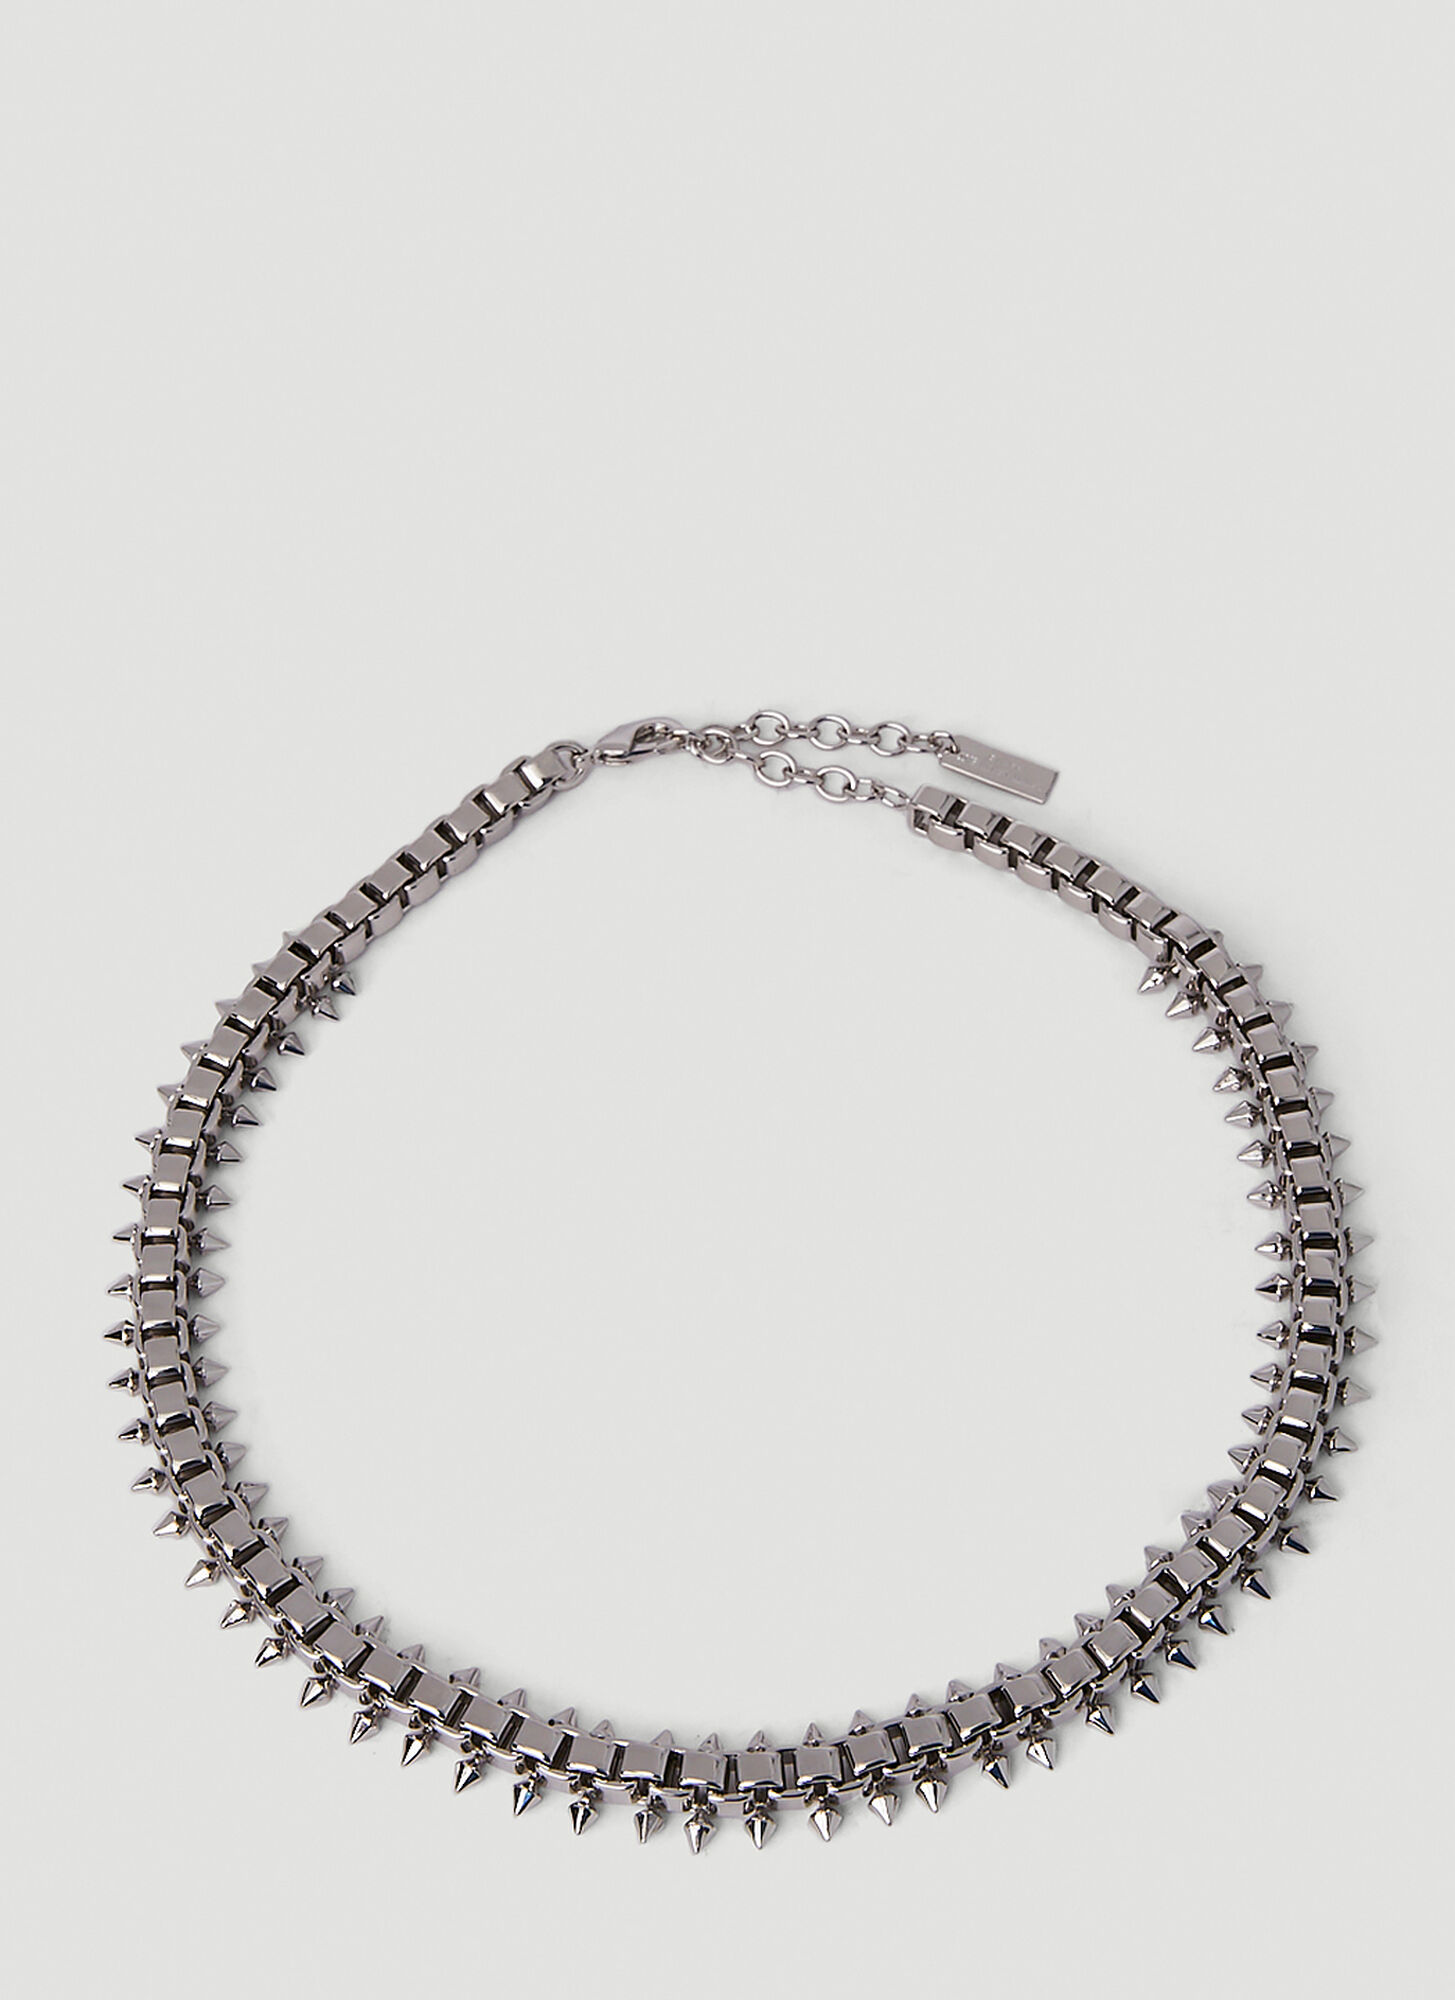 SAINT LAURENT SQUARES AND SPIKES NECKLACE